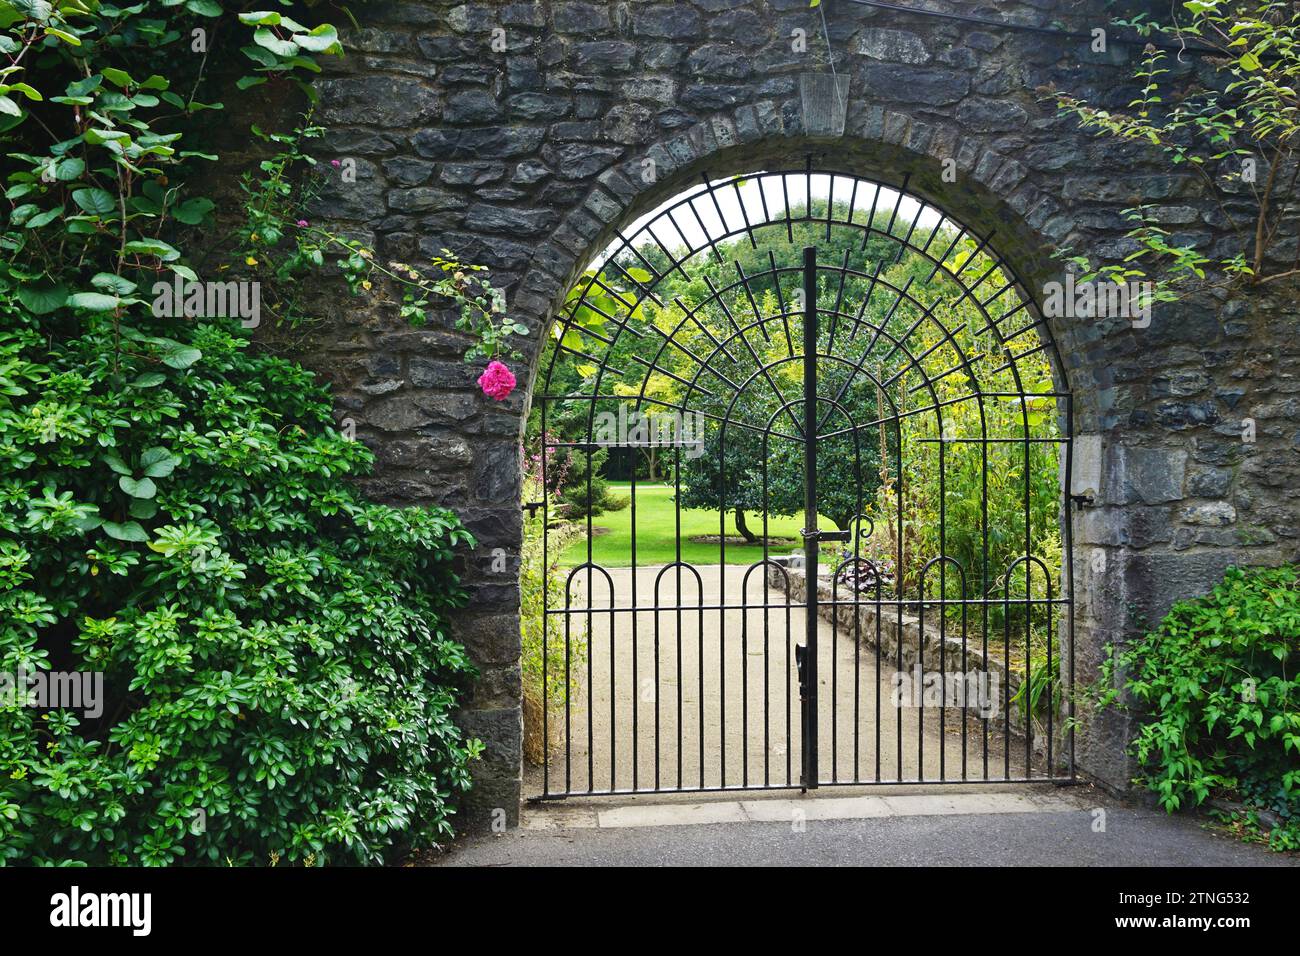 Arch topped iron gate set in vintage stone wall with foliage on either side, one bright pink flower blossom on the left. A garden can be seen beyond Stock Photo